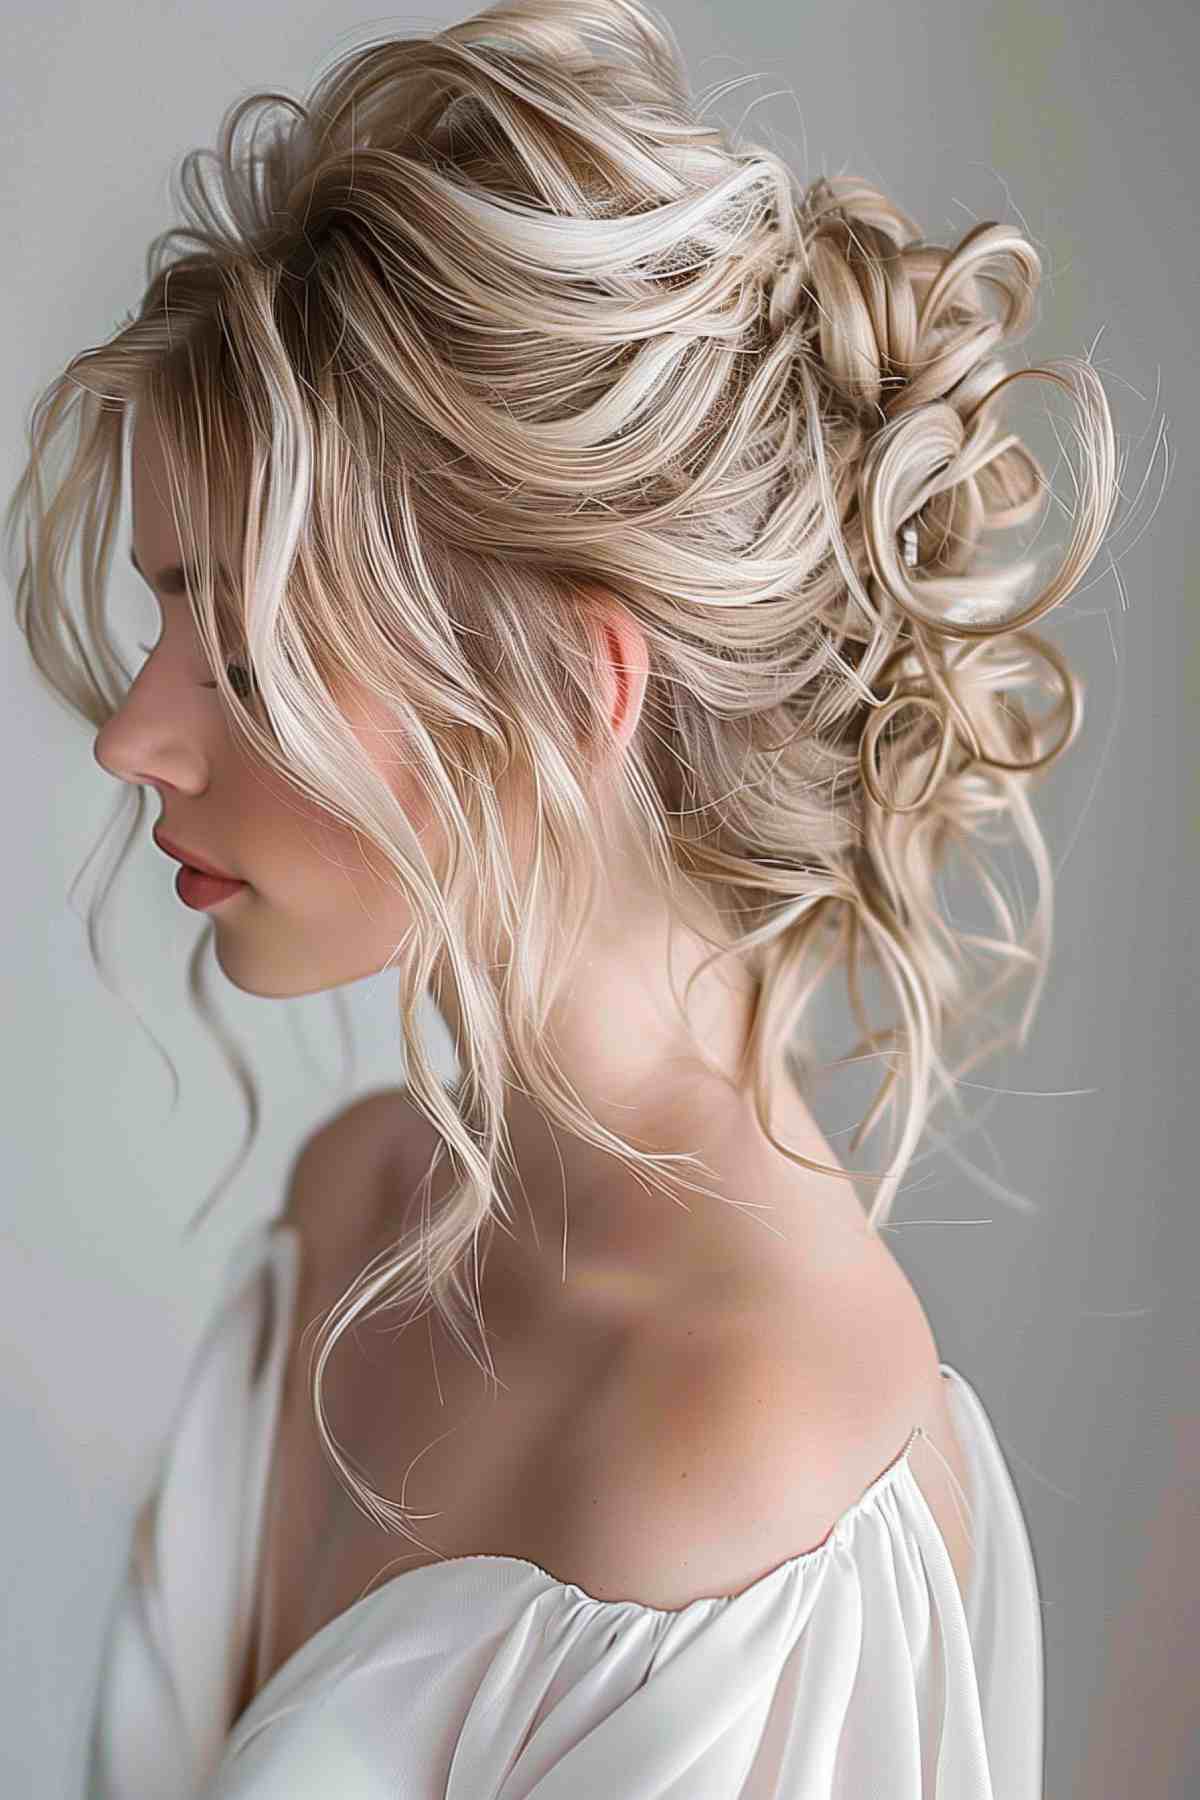 Soft and romantic tousled updo with loosely pinned curls and subtle volume, ideal for medium-length hair.